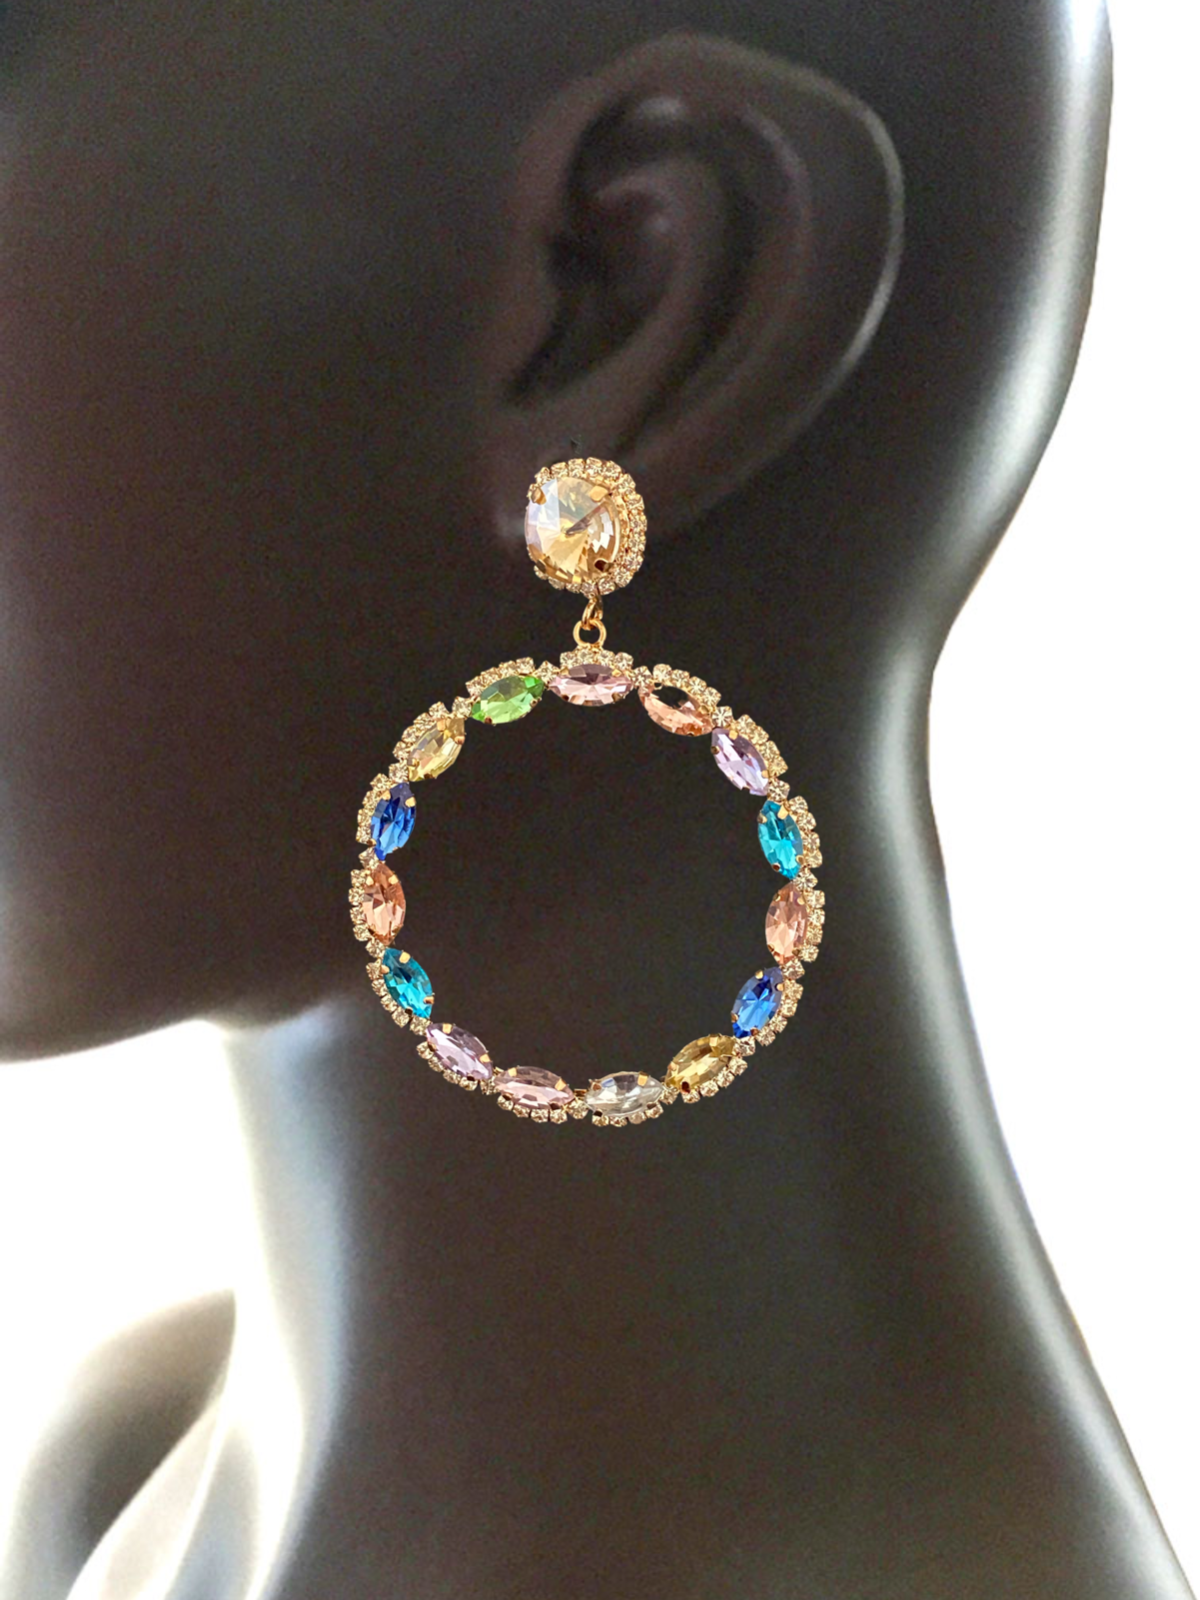 3" Long Multicolor Acrylic Crystals Hoop Earrings Party, Casual Chic, Urban - $16.15